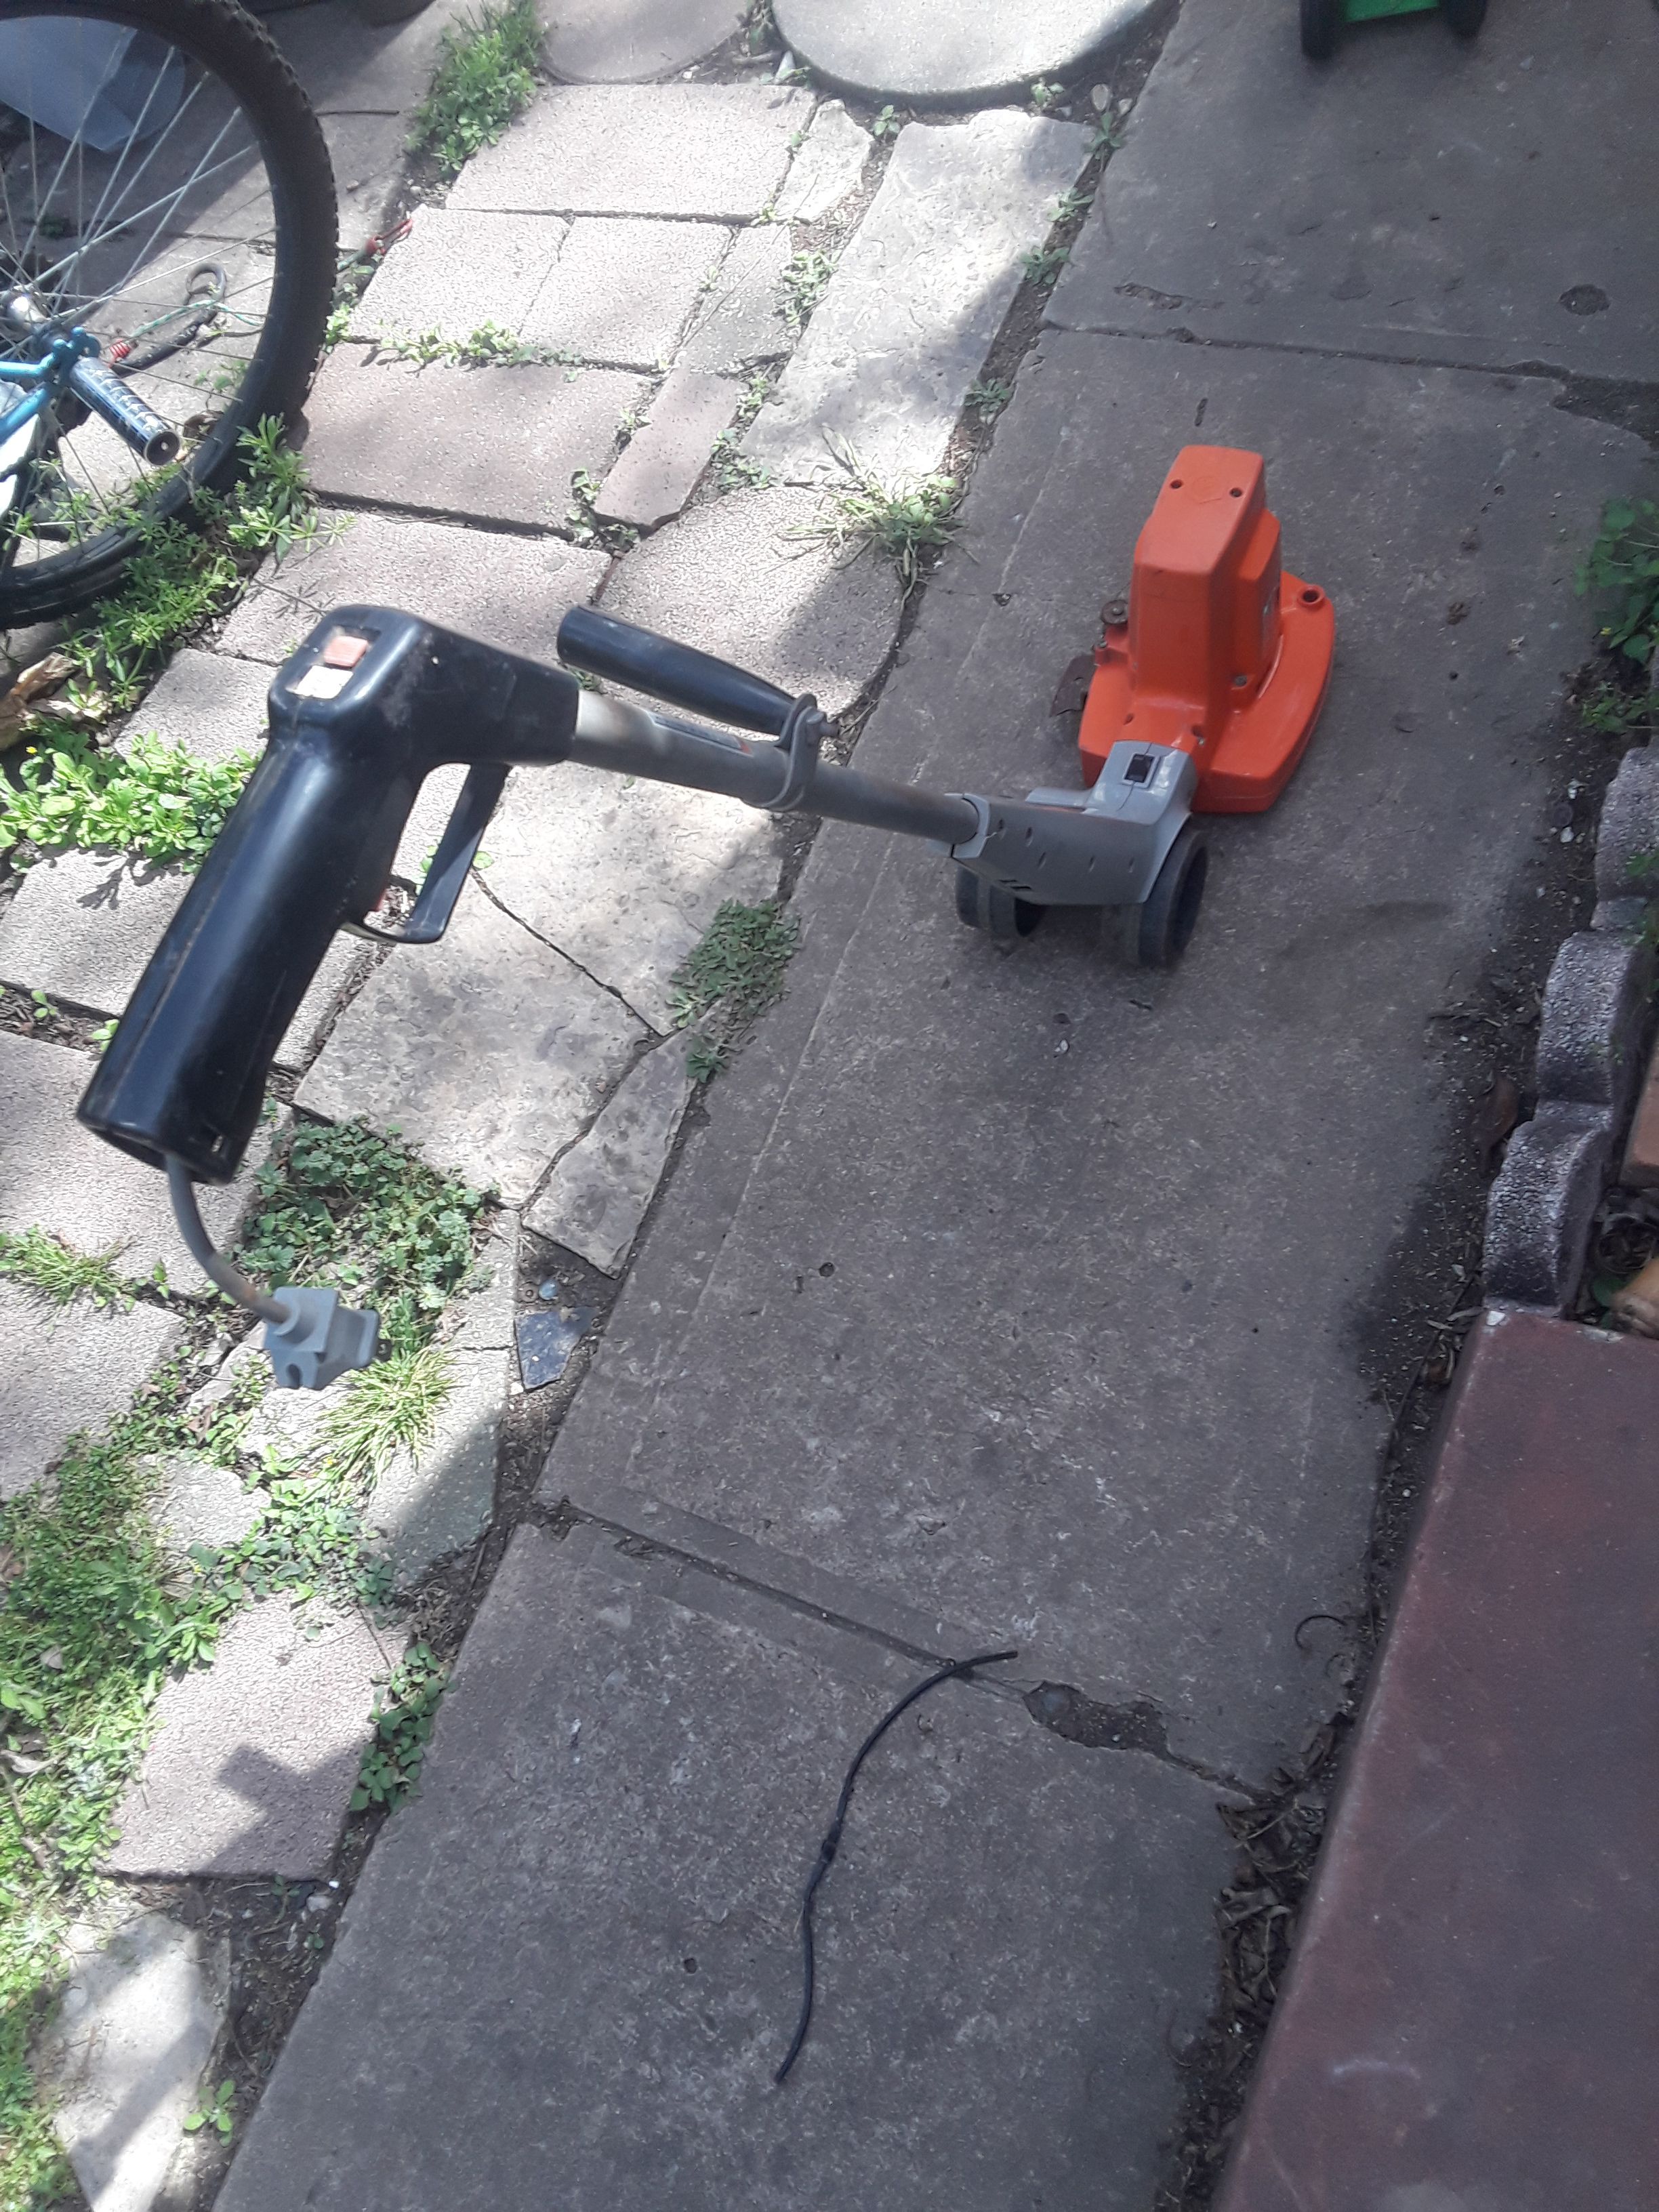 2 Electric Edger Trimmers) a Craftsman and a Black & Decker 8224 Deluxe  Heavy Duty Edger-Trimmer 120v 5300 RPM 1.25 HP for Sale in San Antonio, TX  - OfferUp